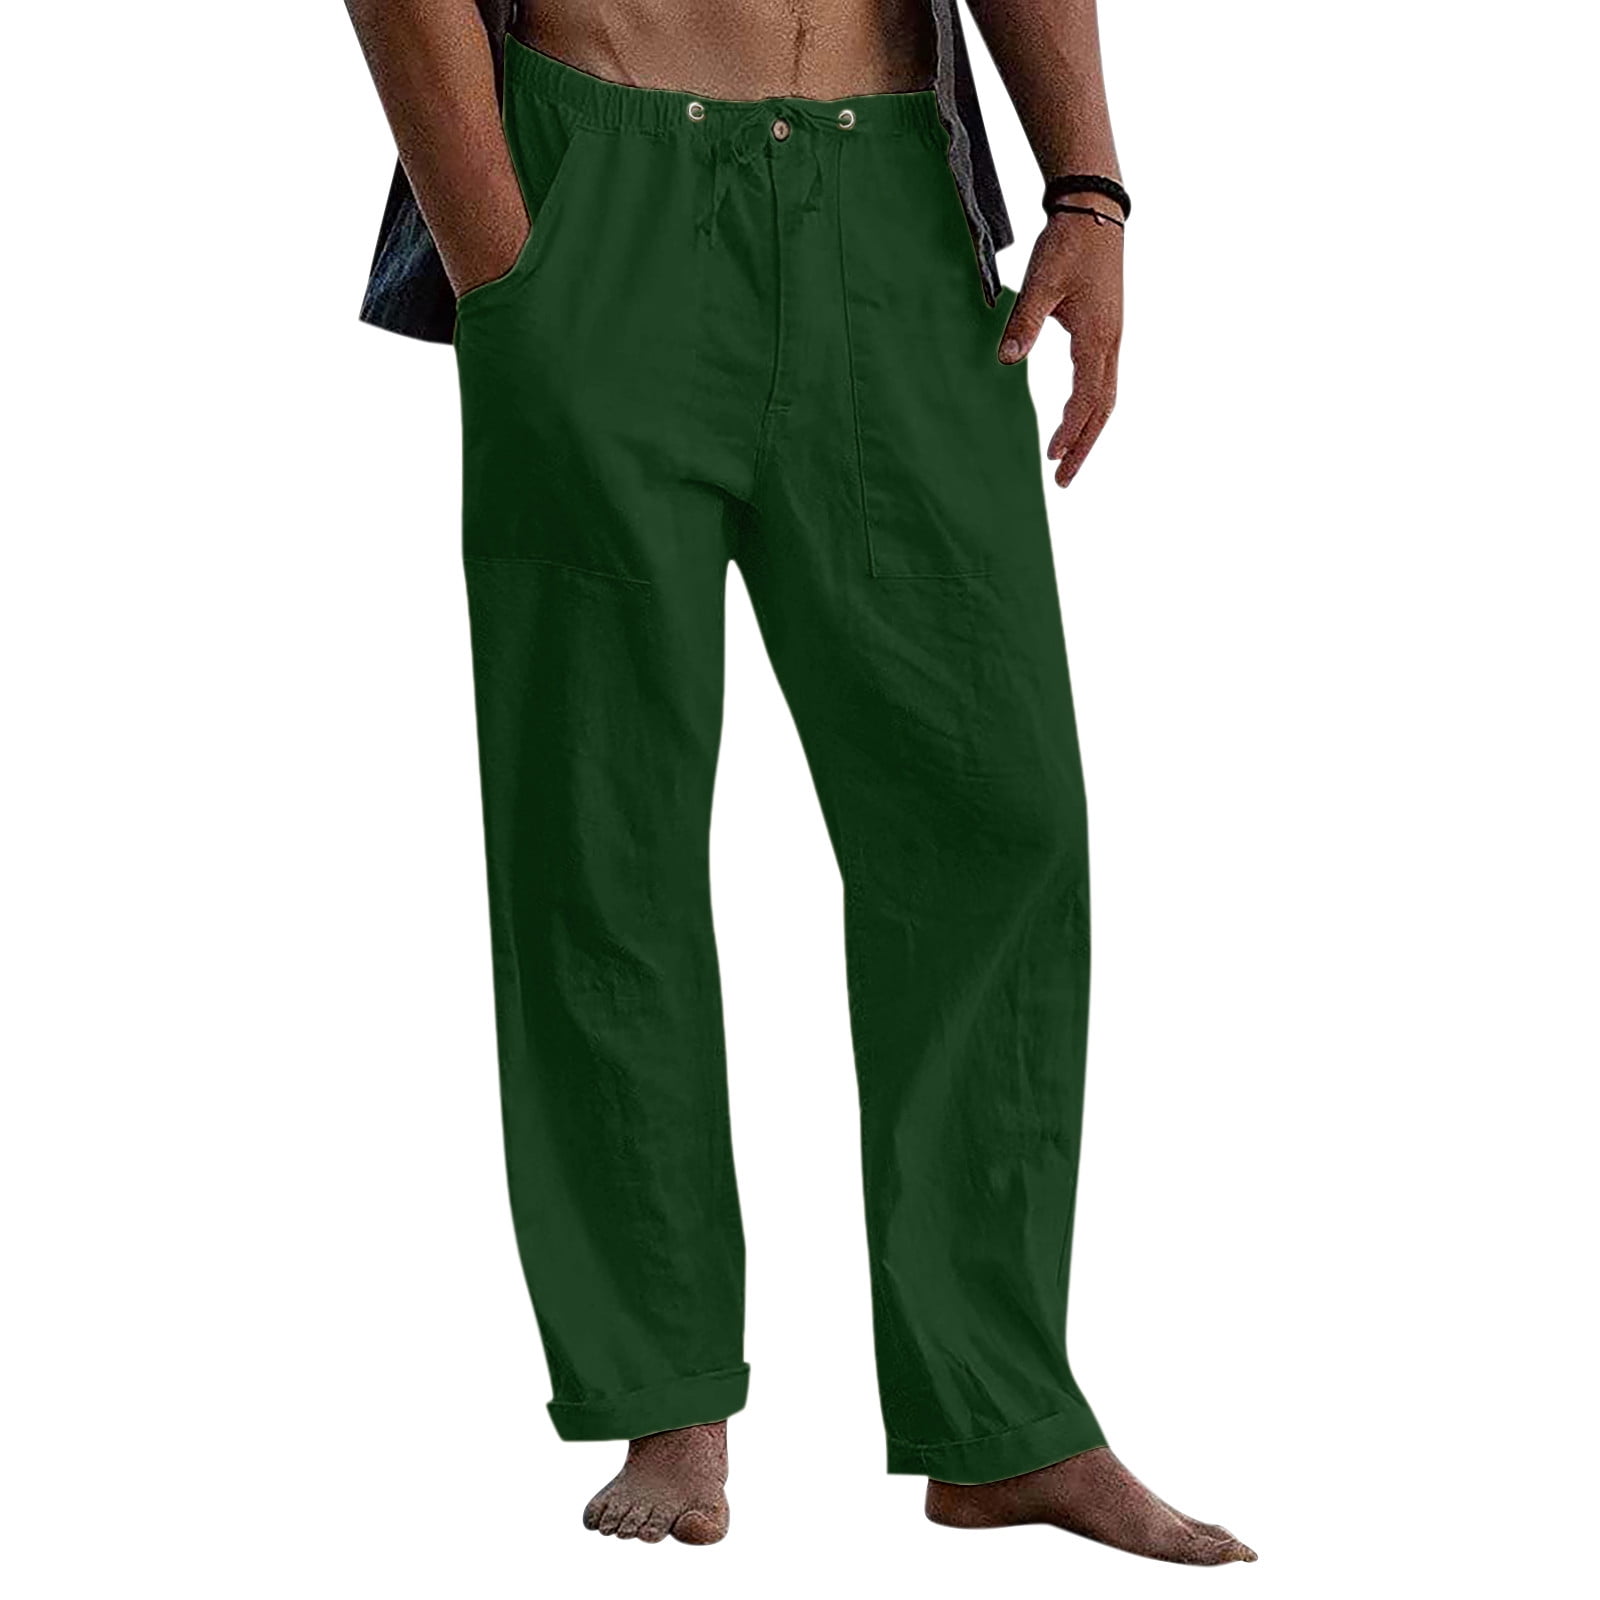 Gubotare Sweatpants For Men Big And Tall Men's Lightweight Joggers  Sweatpants with Zipper Pockets Gym Workout Pants for Running Track Casual  Golf,Green XL 